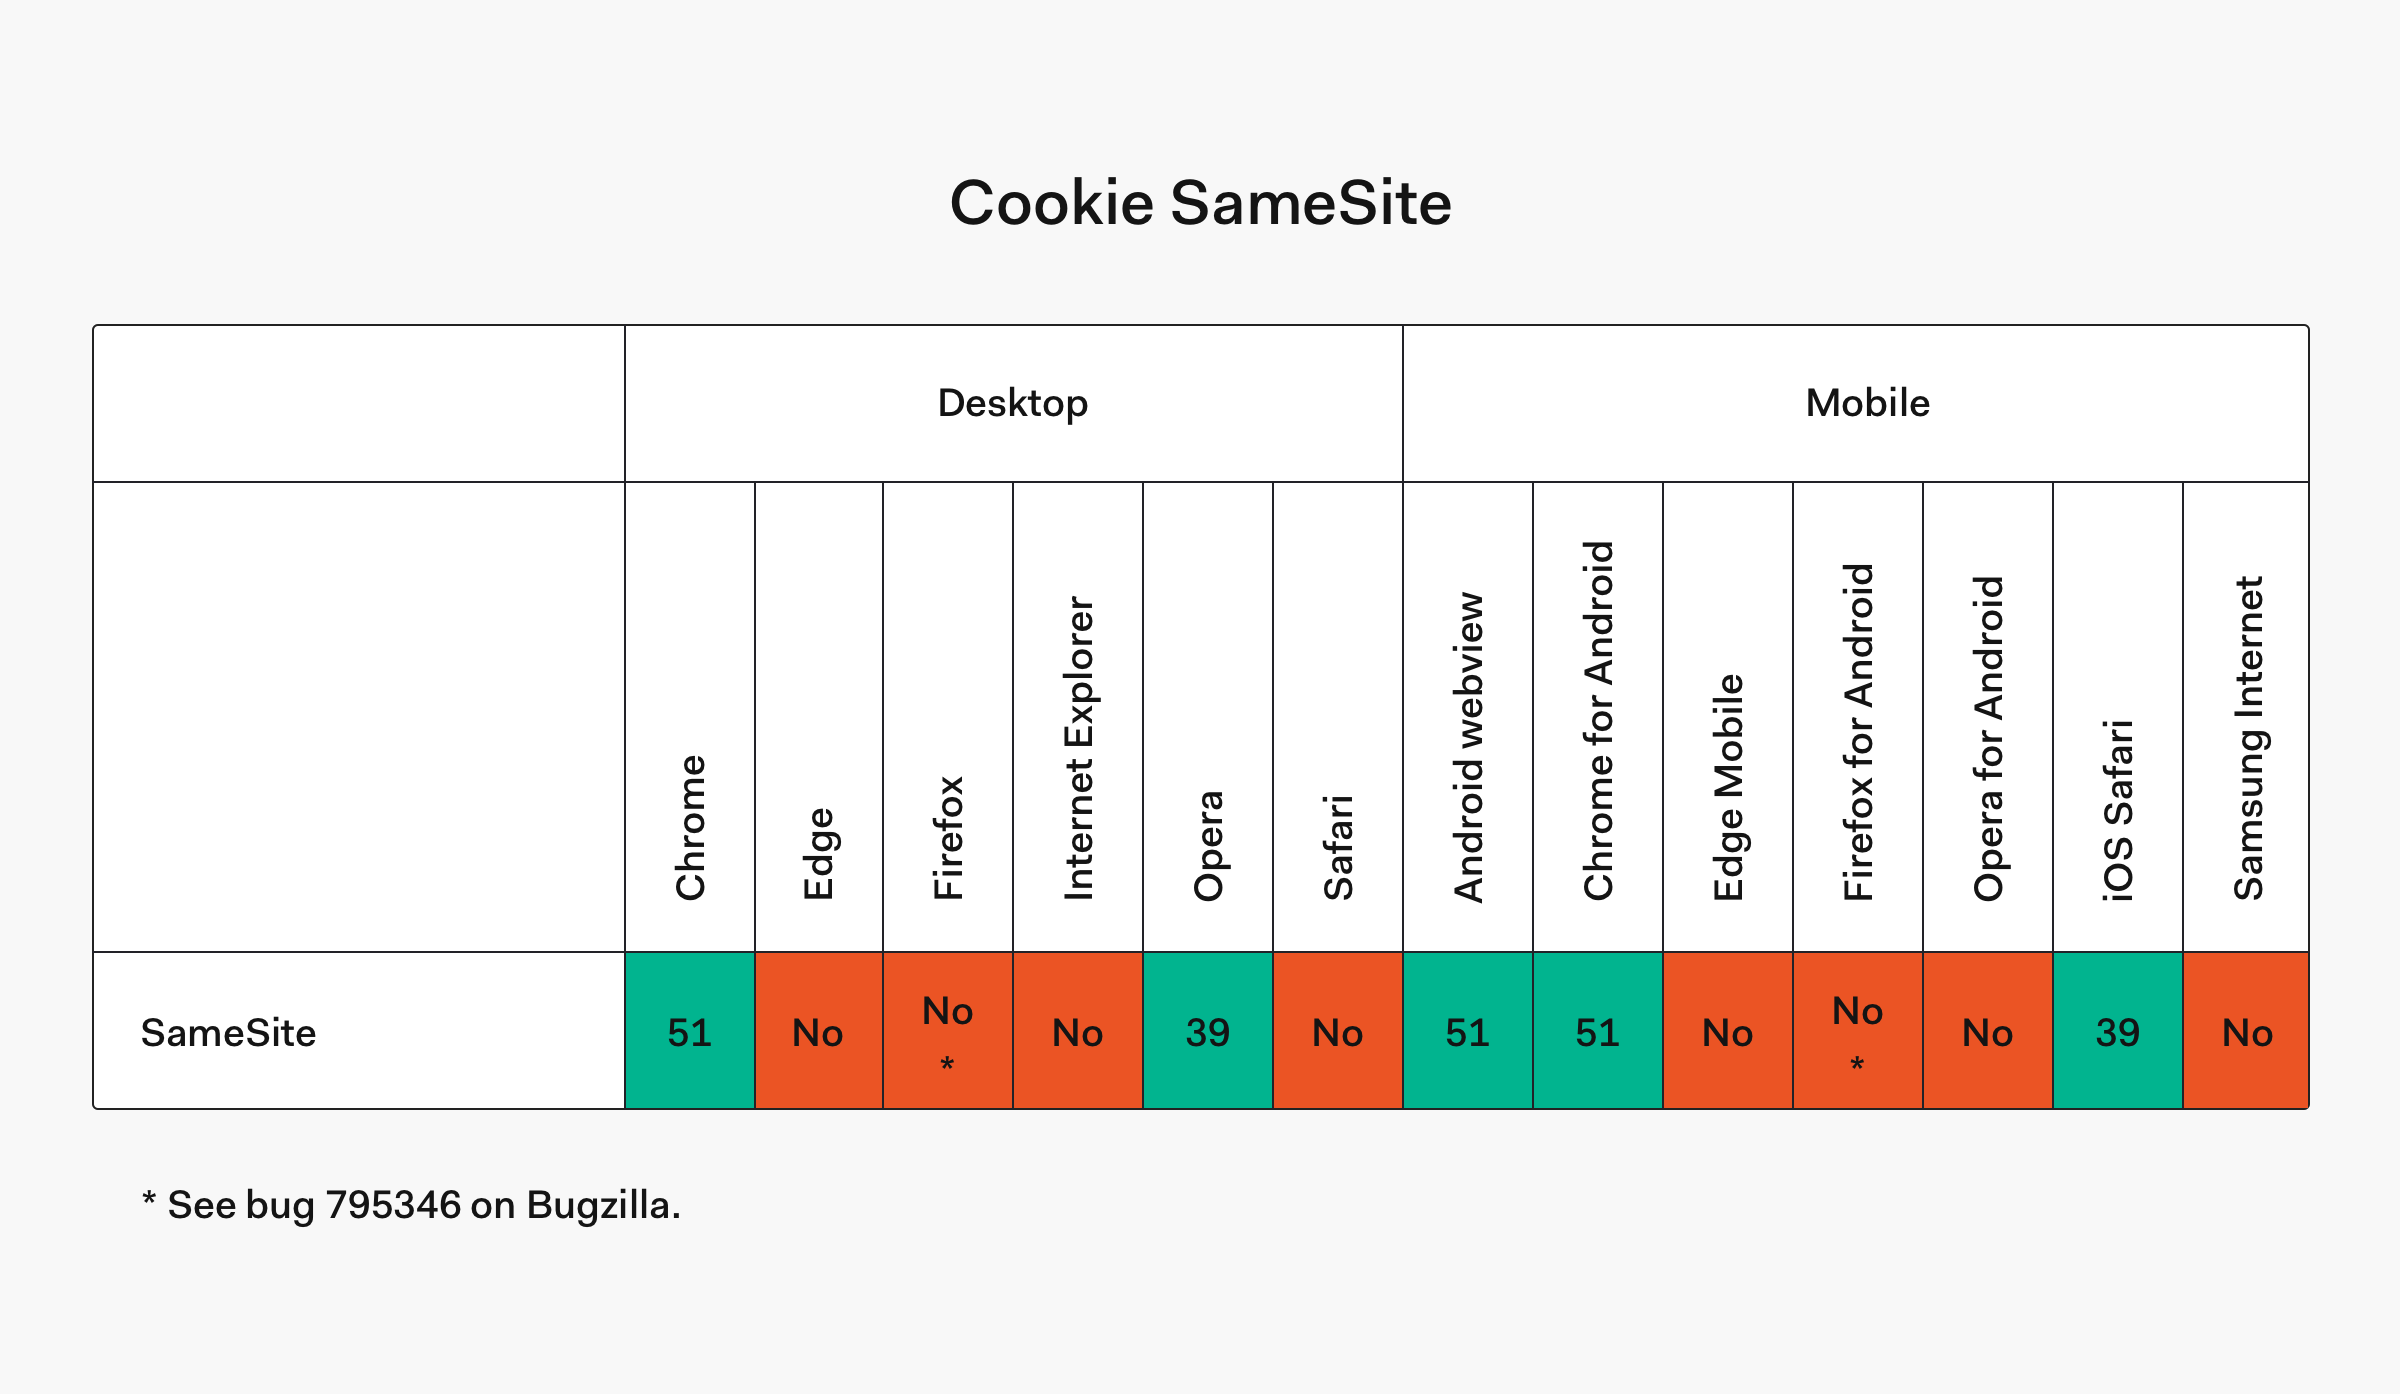 Cookie SameSite browser compatibility table